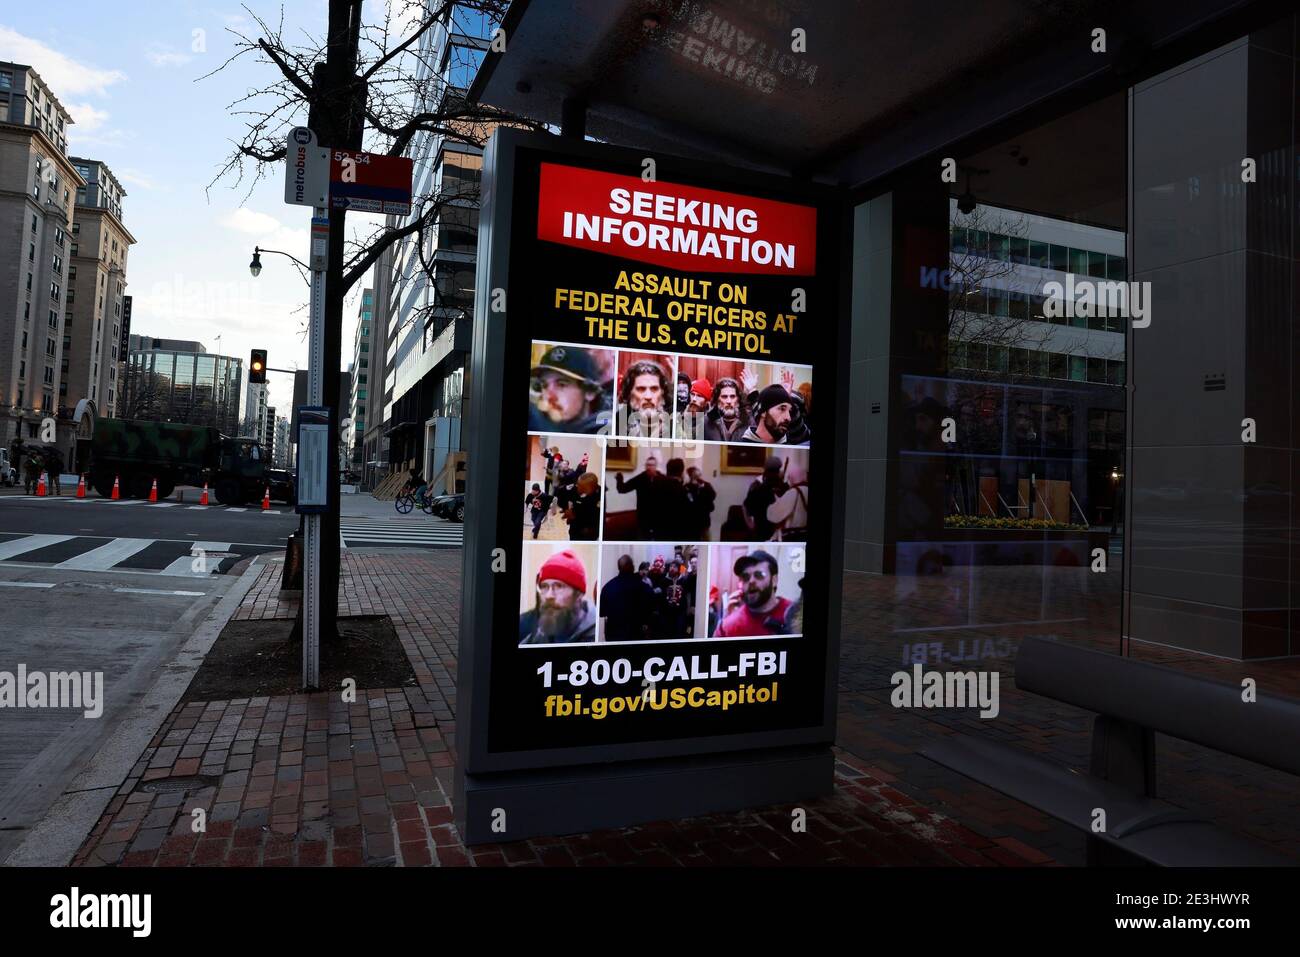 01182021- Washington, District of Columbia, USA: An electronic advertisement not far from the White House snows the faces of suspects who assaulted federal officers at the Capitol Building during the January 6, 2021 storming. The FBI is asking anybody with information about the whereabouts of the suspects to make contact with law enforcement. Stock Photo